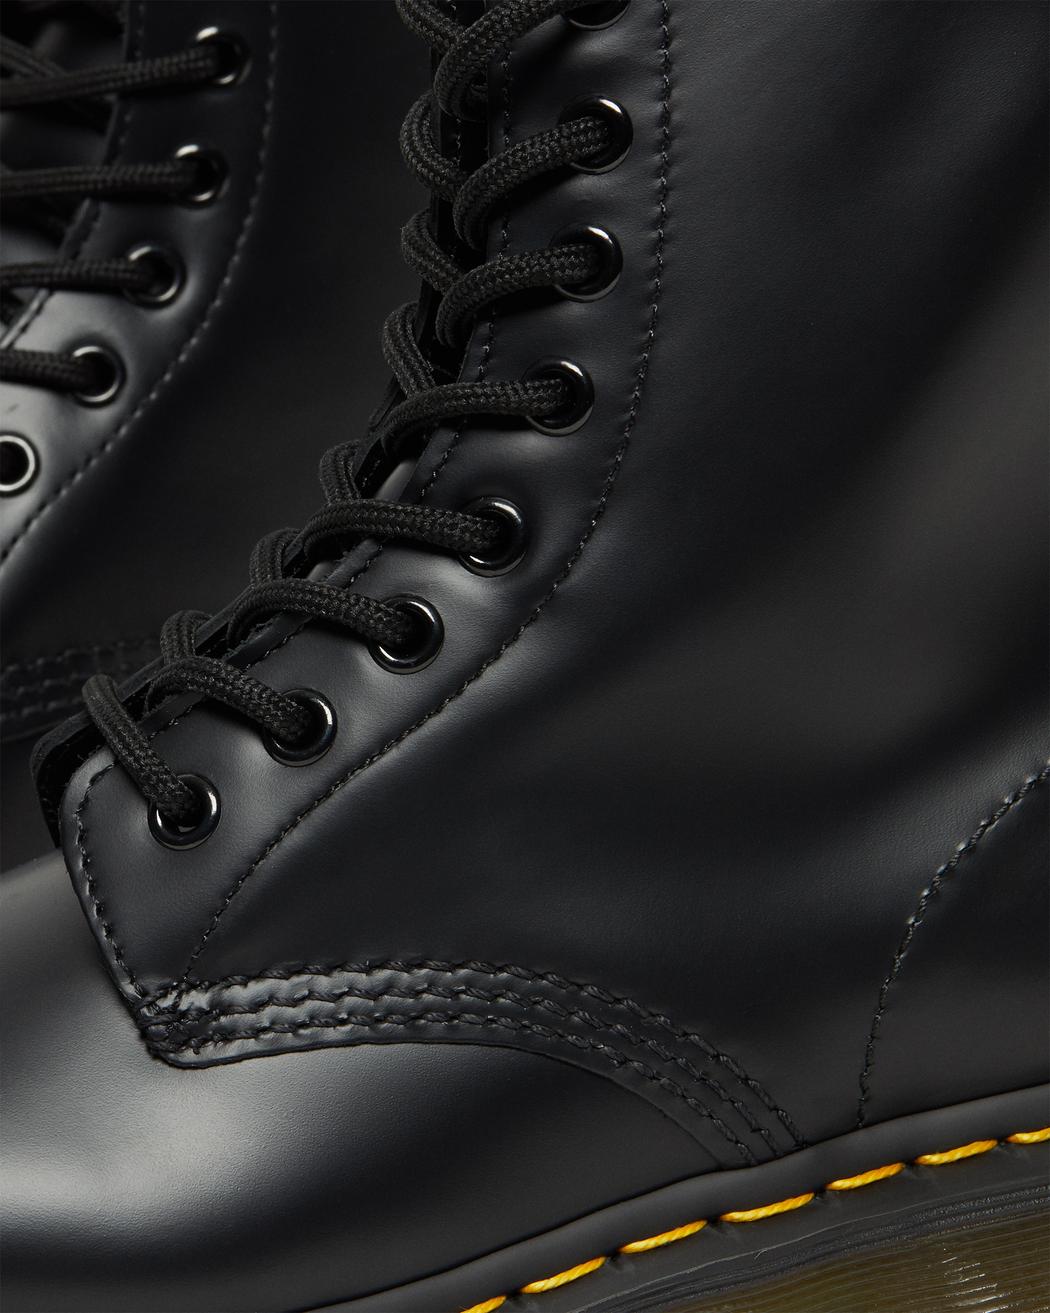 A mid-ankle height, laced, black leather boot.